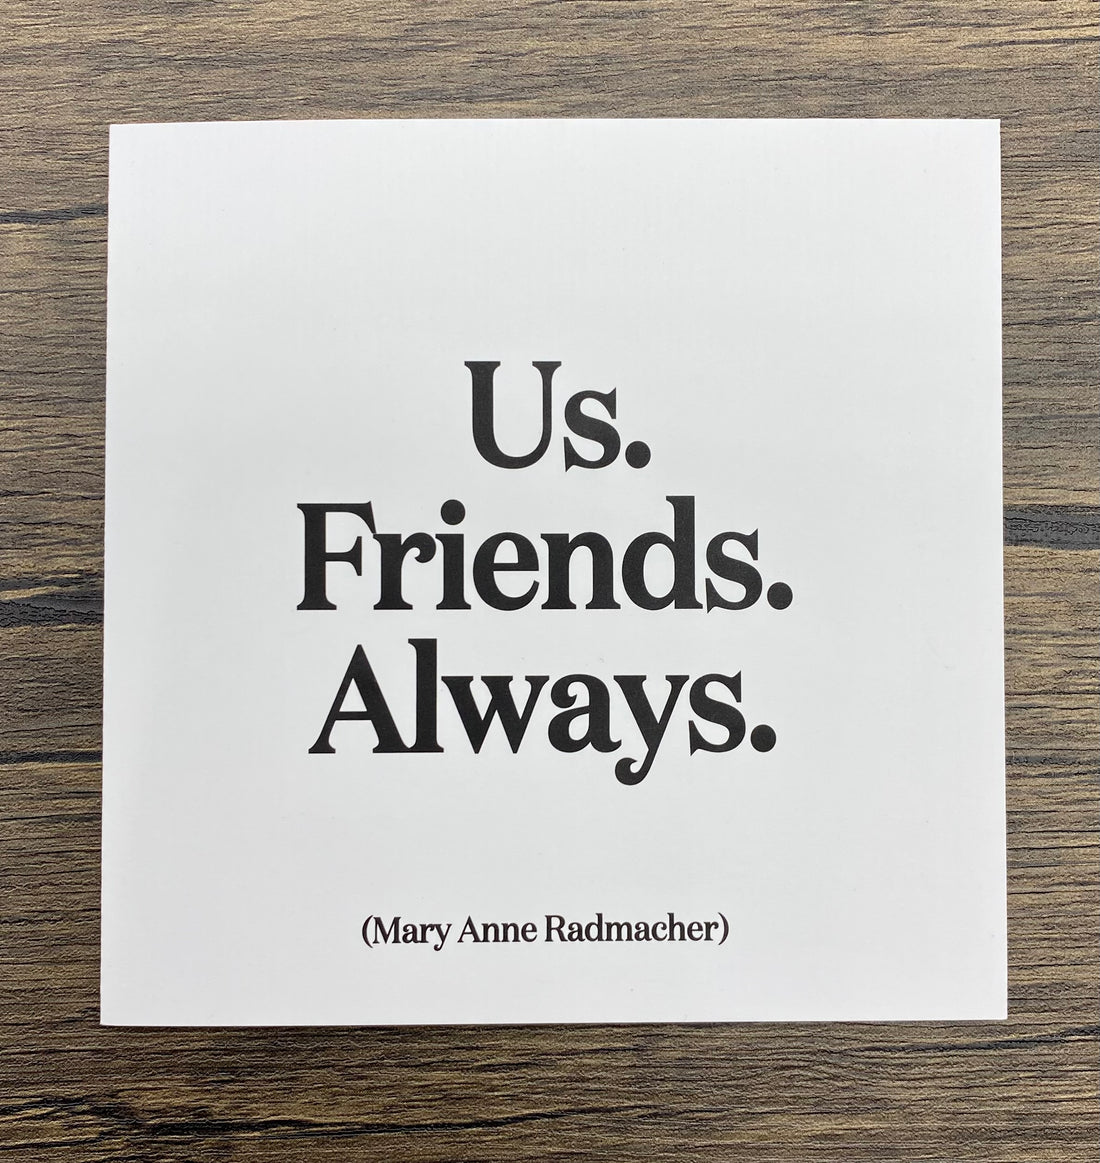 Quotable Card: Us friends always.